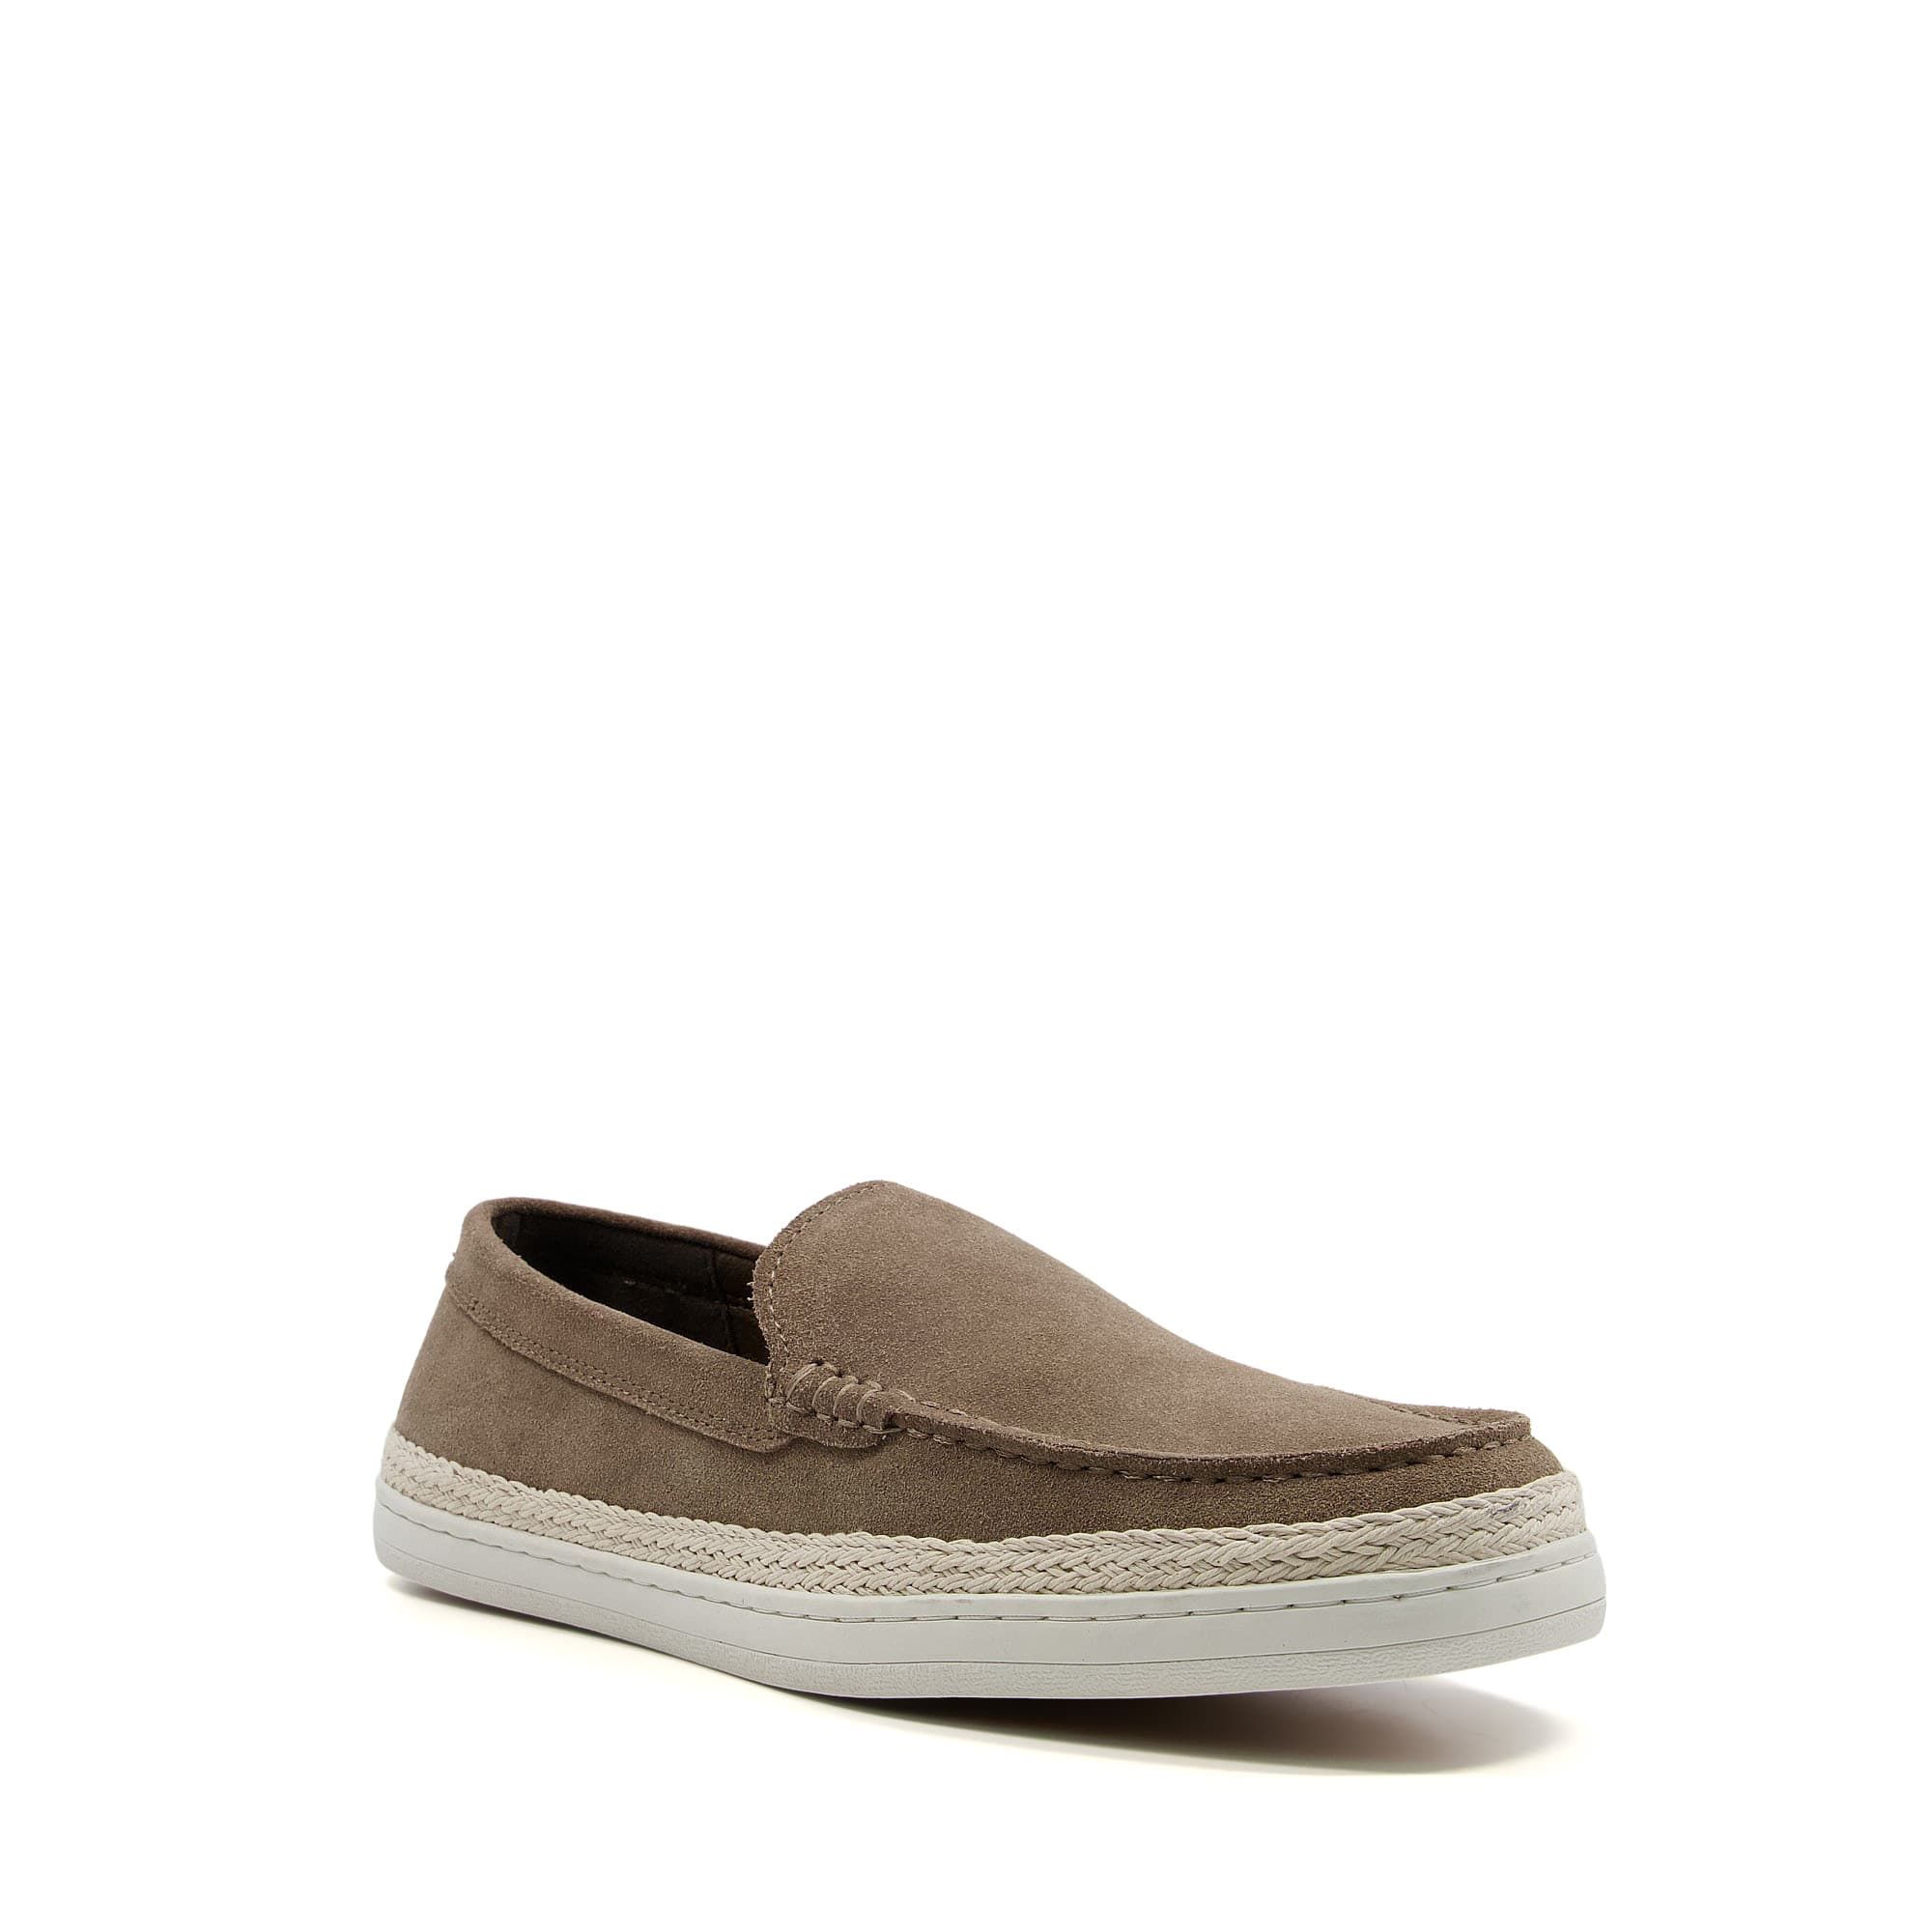 Cool and comfortable, our Brayley plimsolls will be your go-to everyday pair. This nubuck leather style slips on with ease and has a woven midsole.